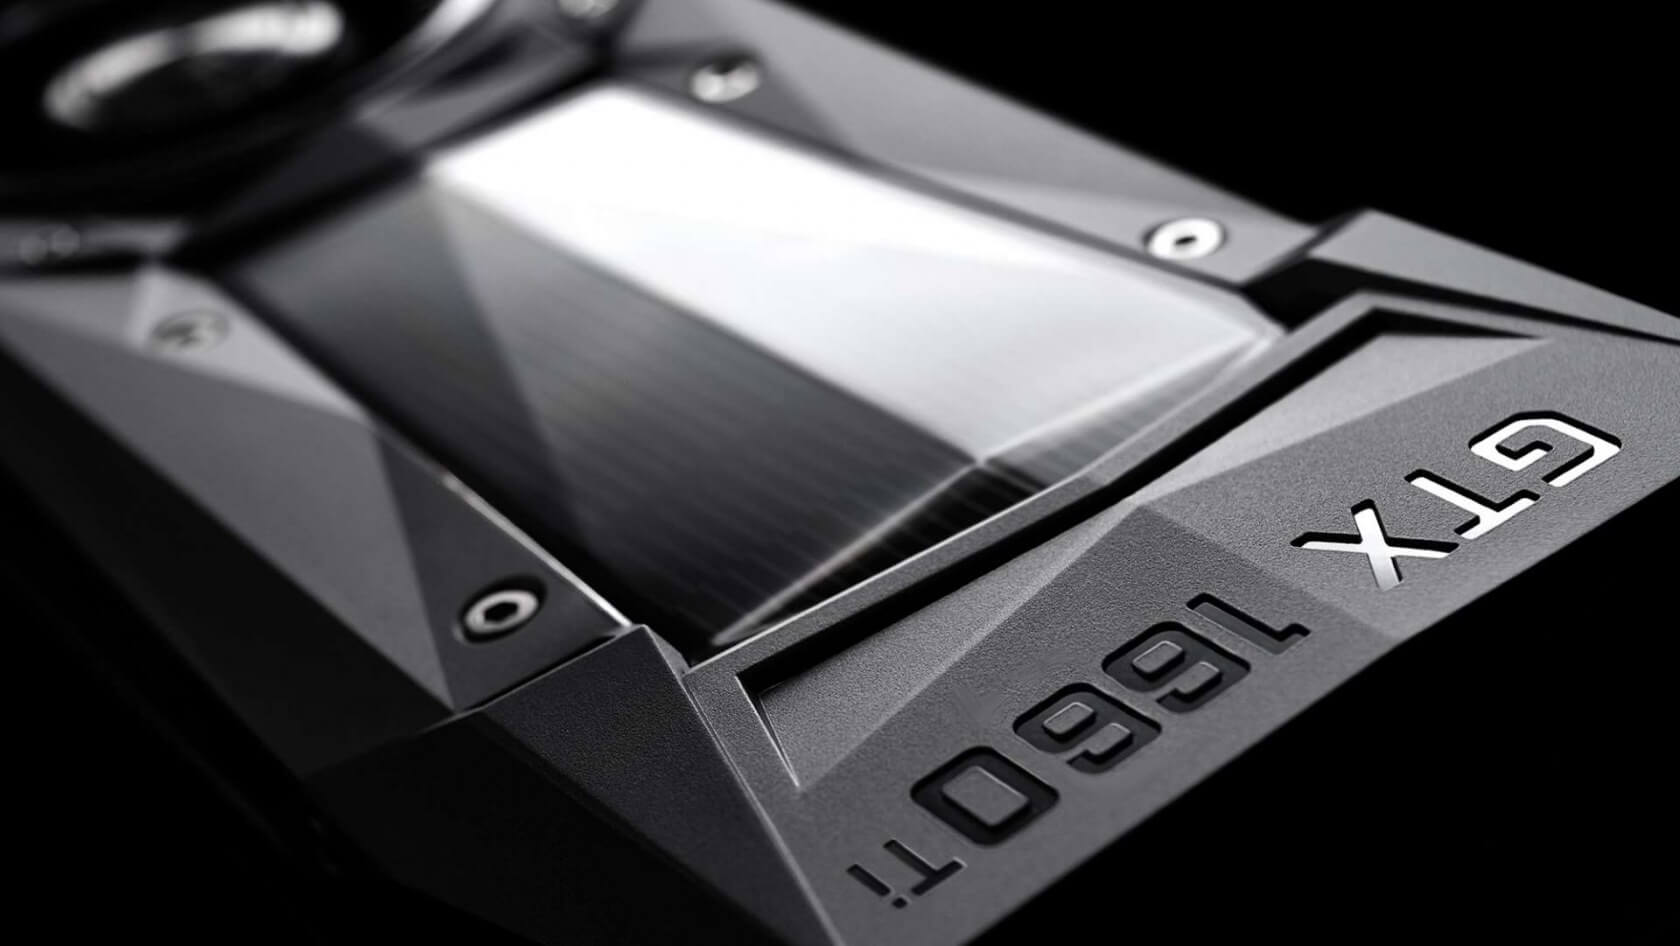 Specifications emerge for upcoming GeForce GTX 1660 Ti